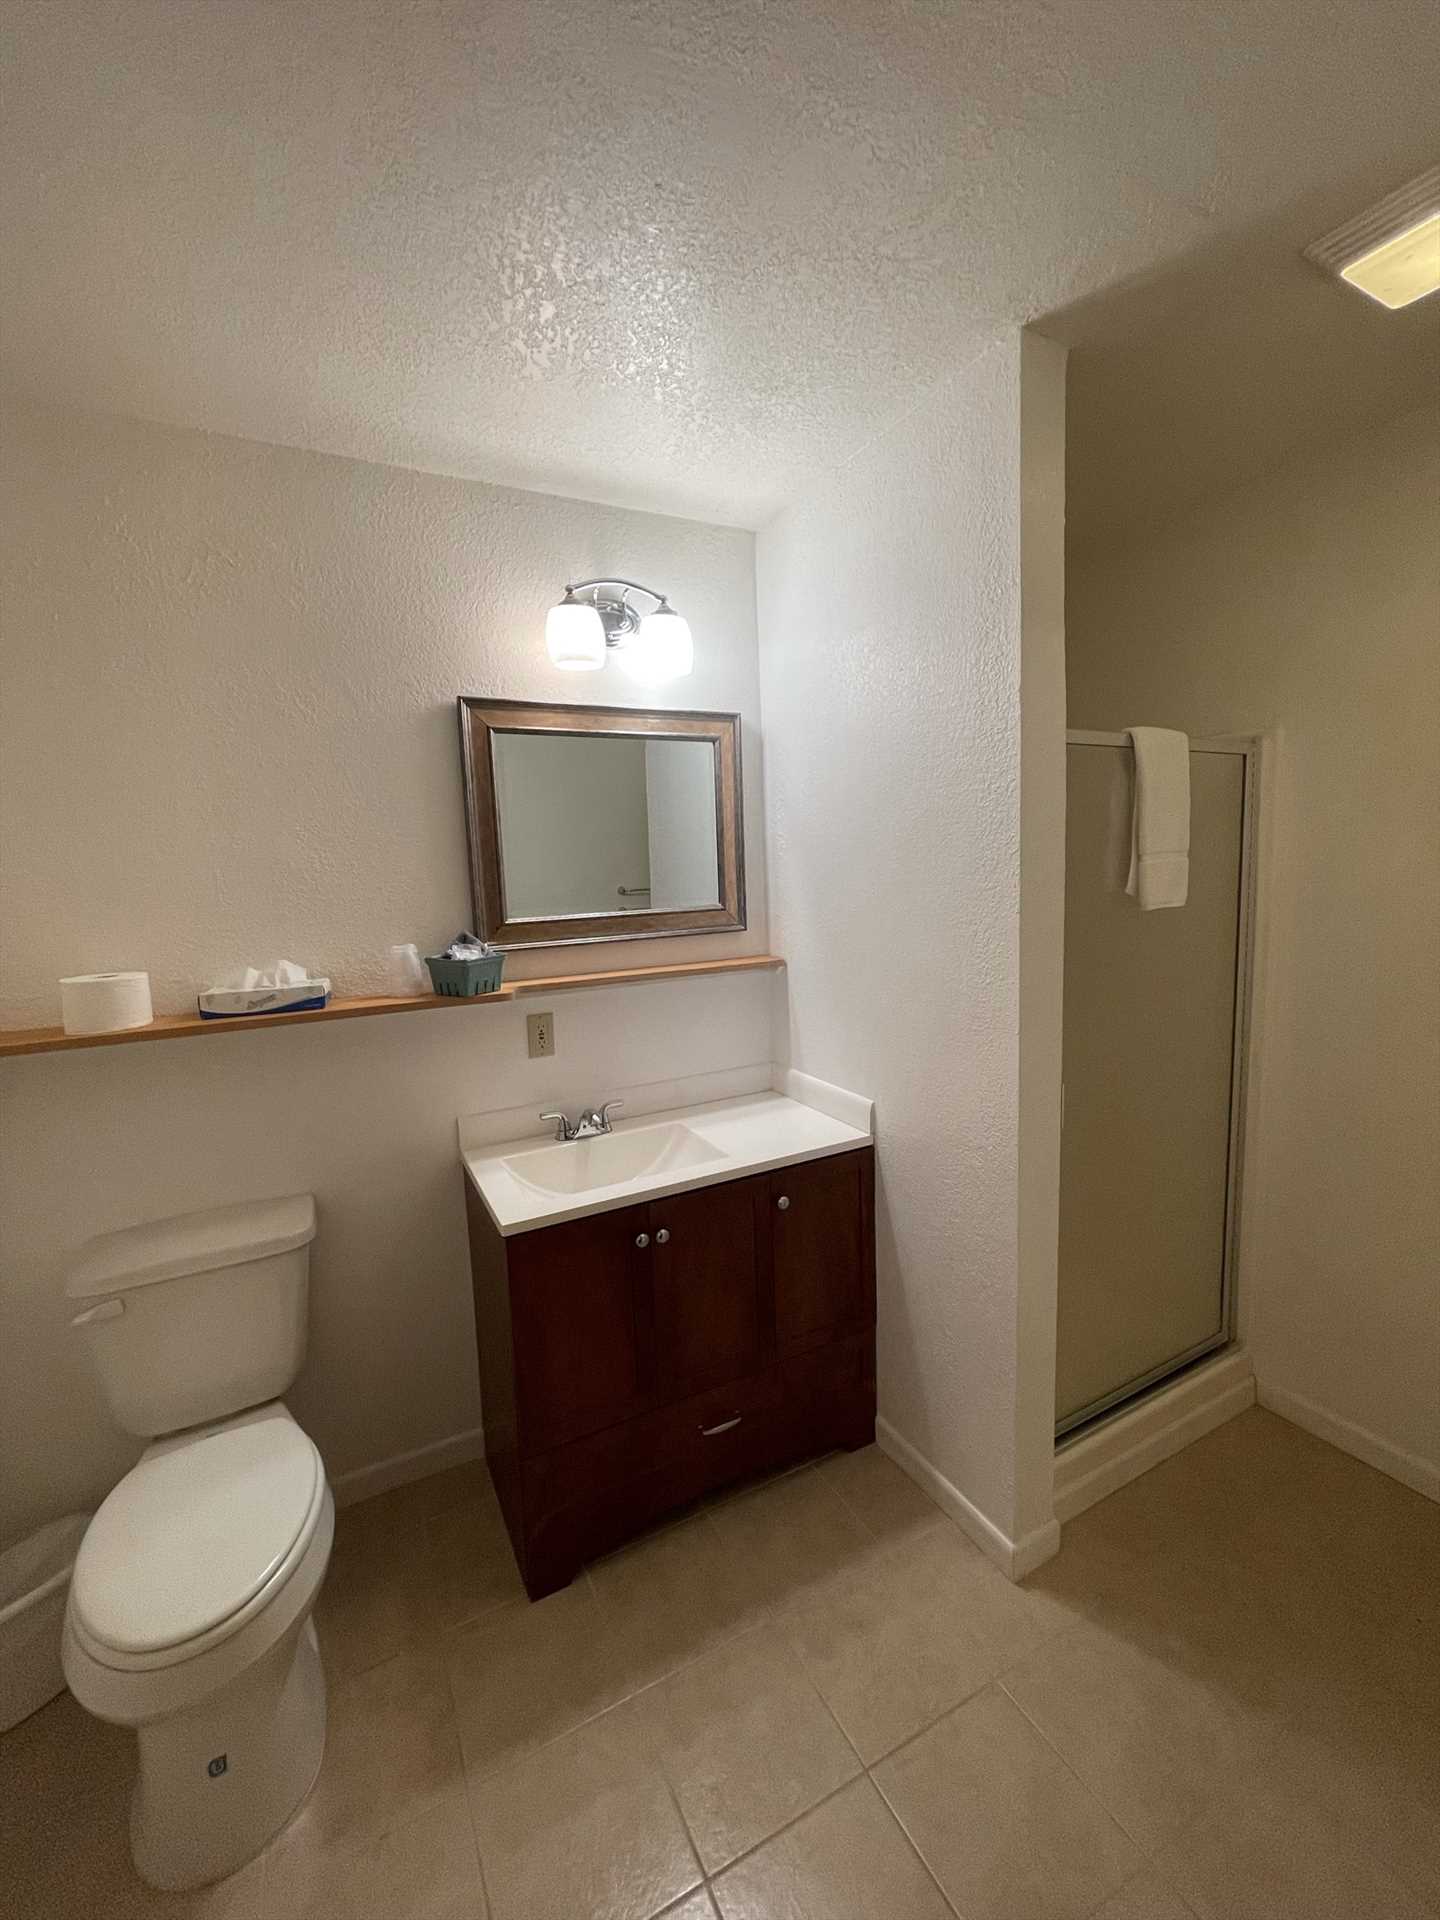                                                 A shower stall is installed in the clean full bath, and clean and soft bed and bath linens are provided for all during your stay!